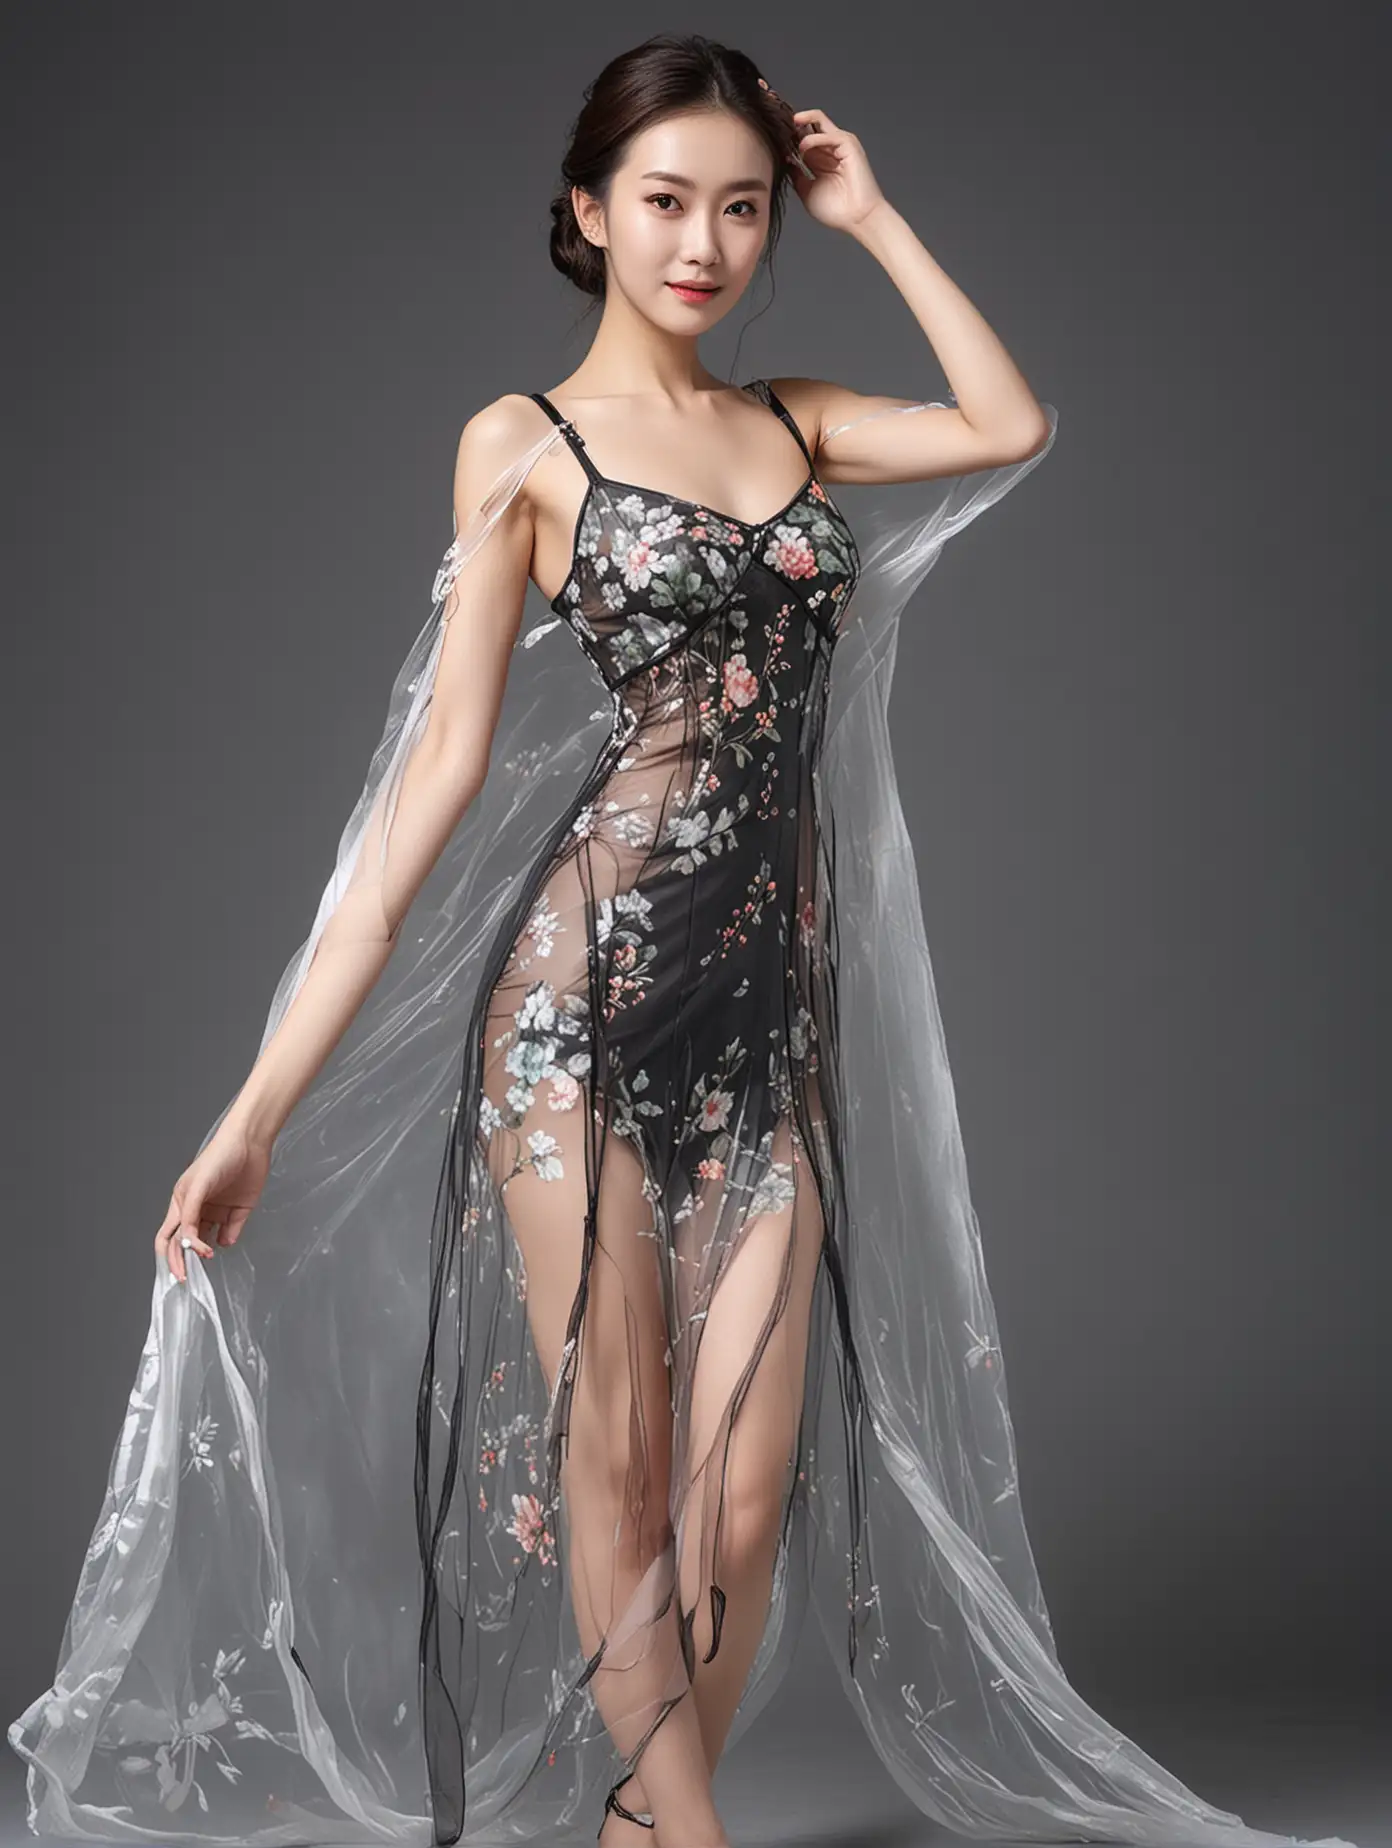 Beautiful Woman in Anhui Strap Dress with Transparent Fabric